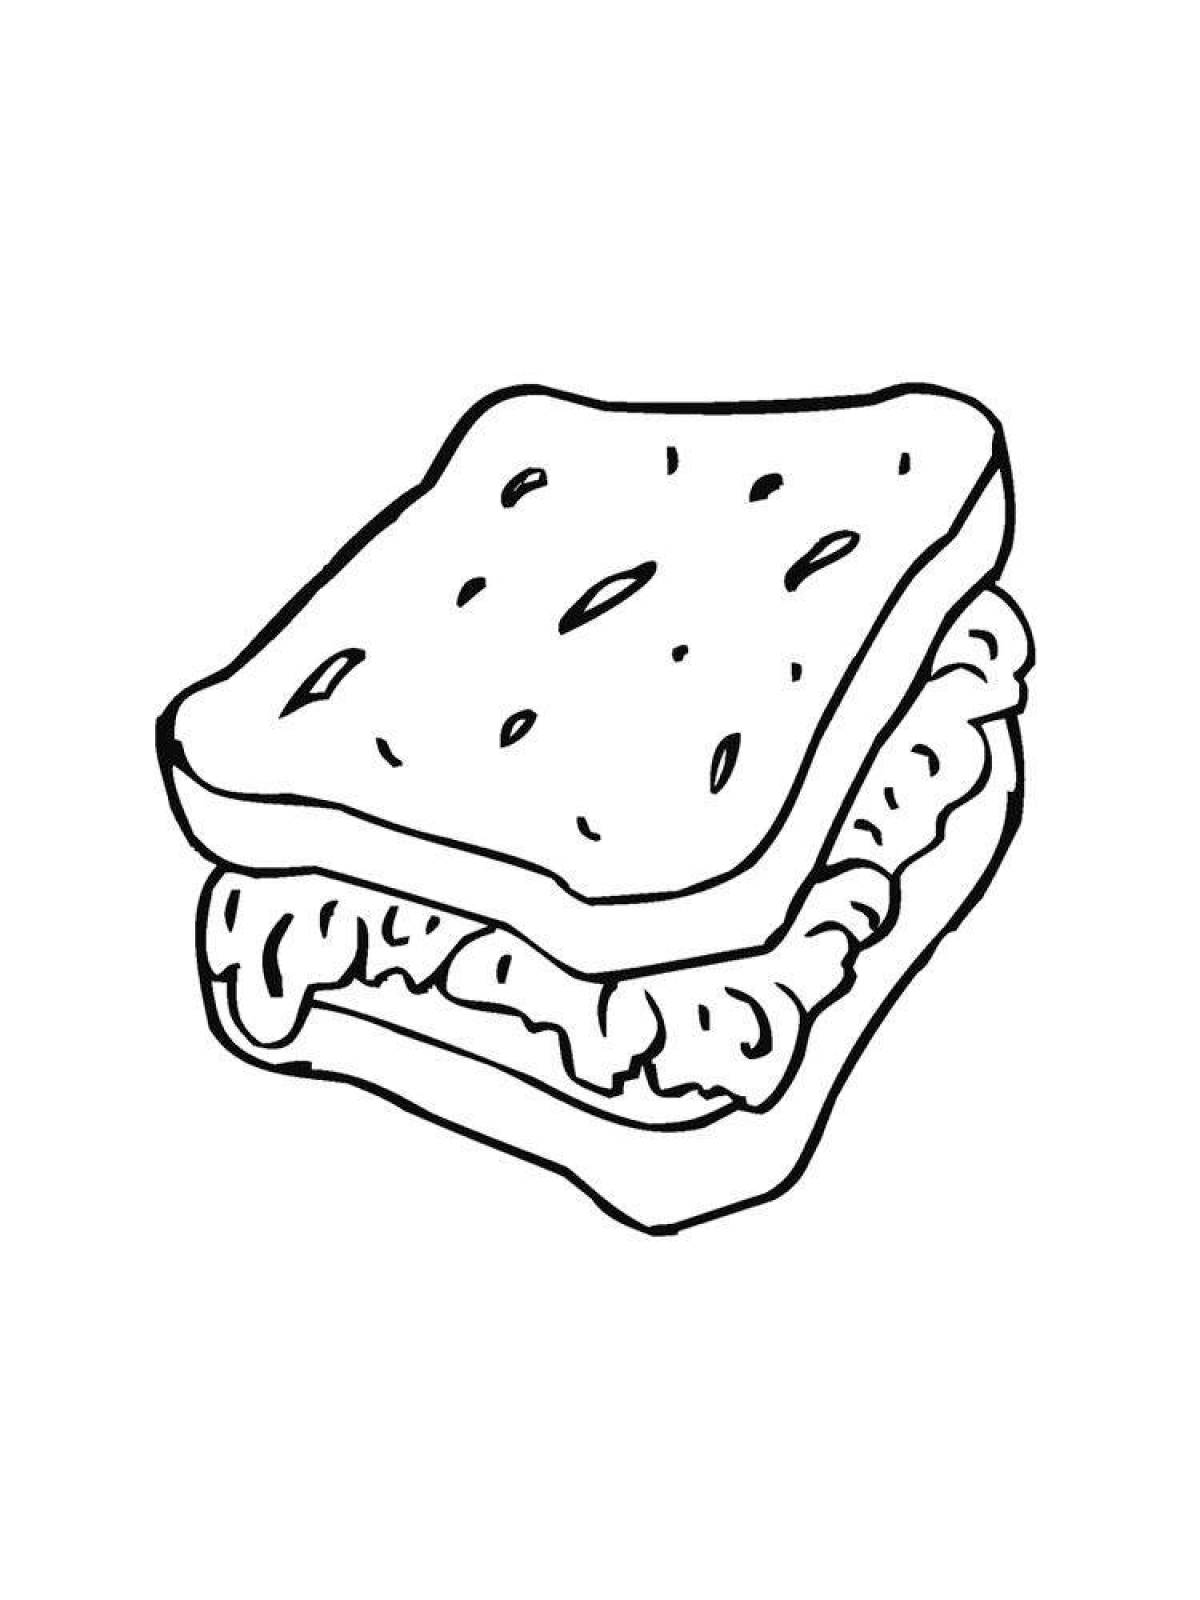 Bright sandwich coloring page